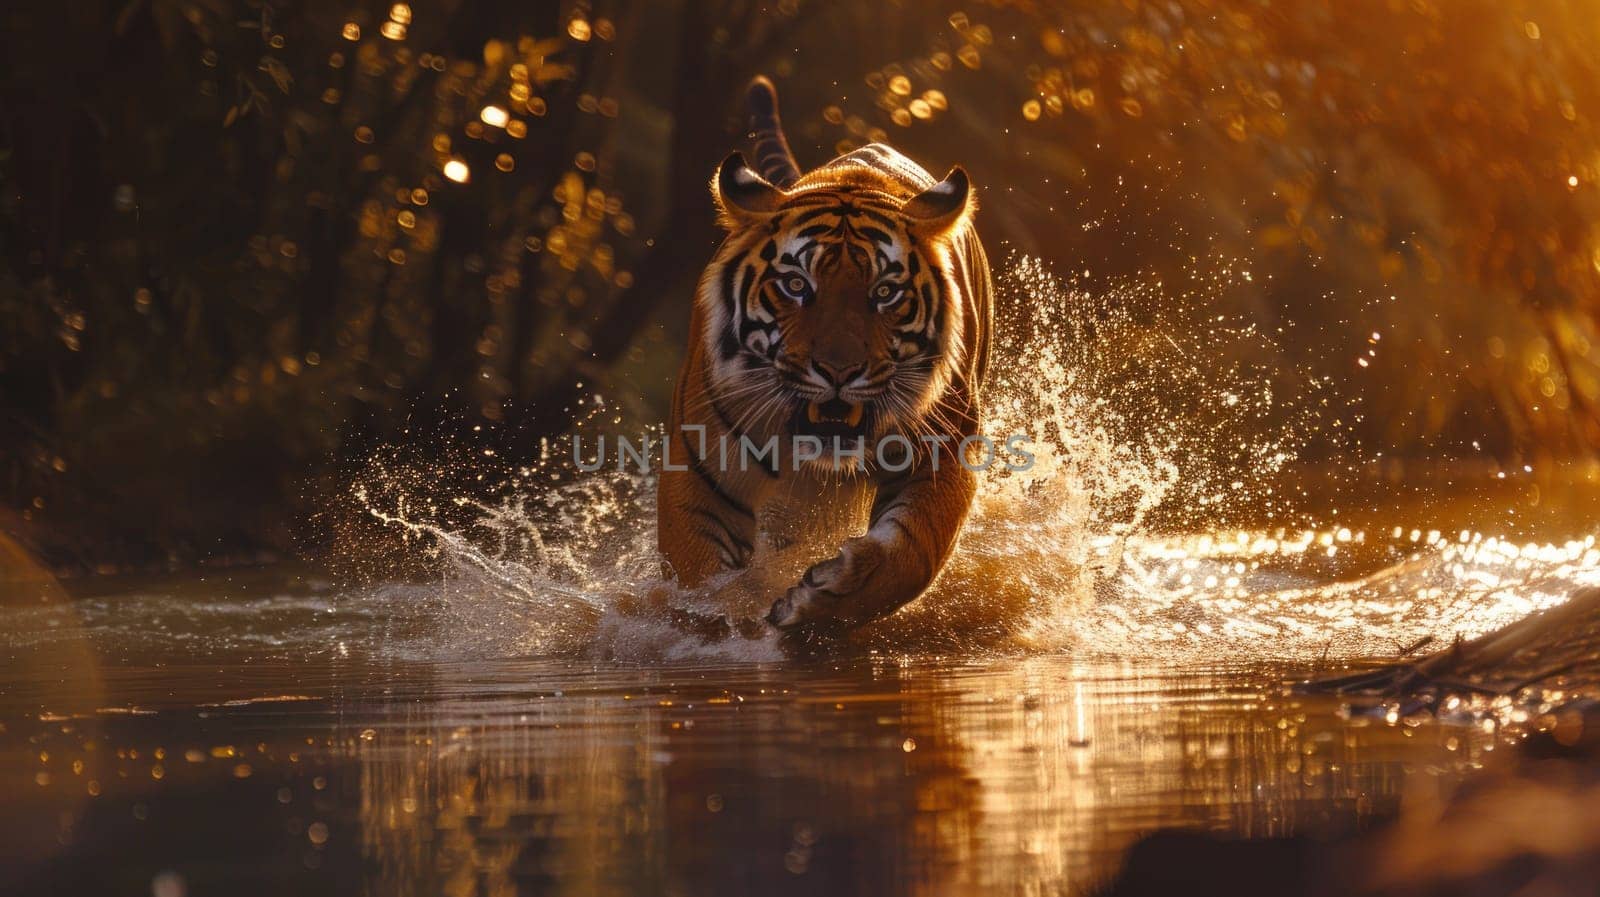 A tiger is running through the water, leaving a trail of splashes behind it.